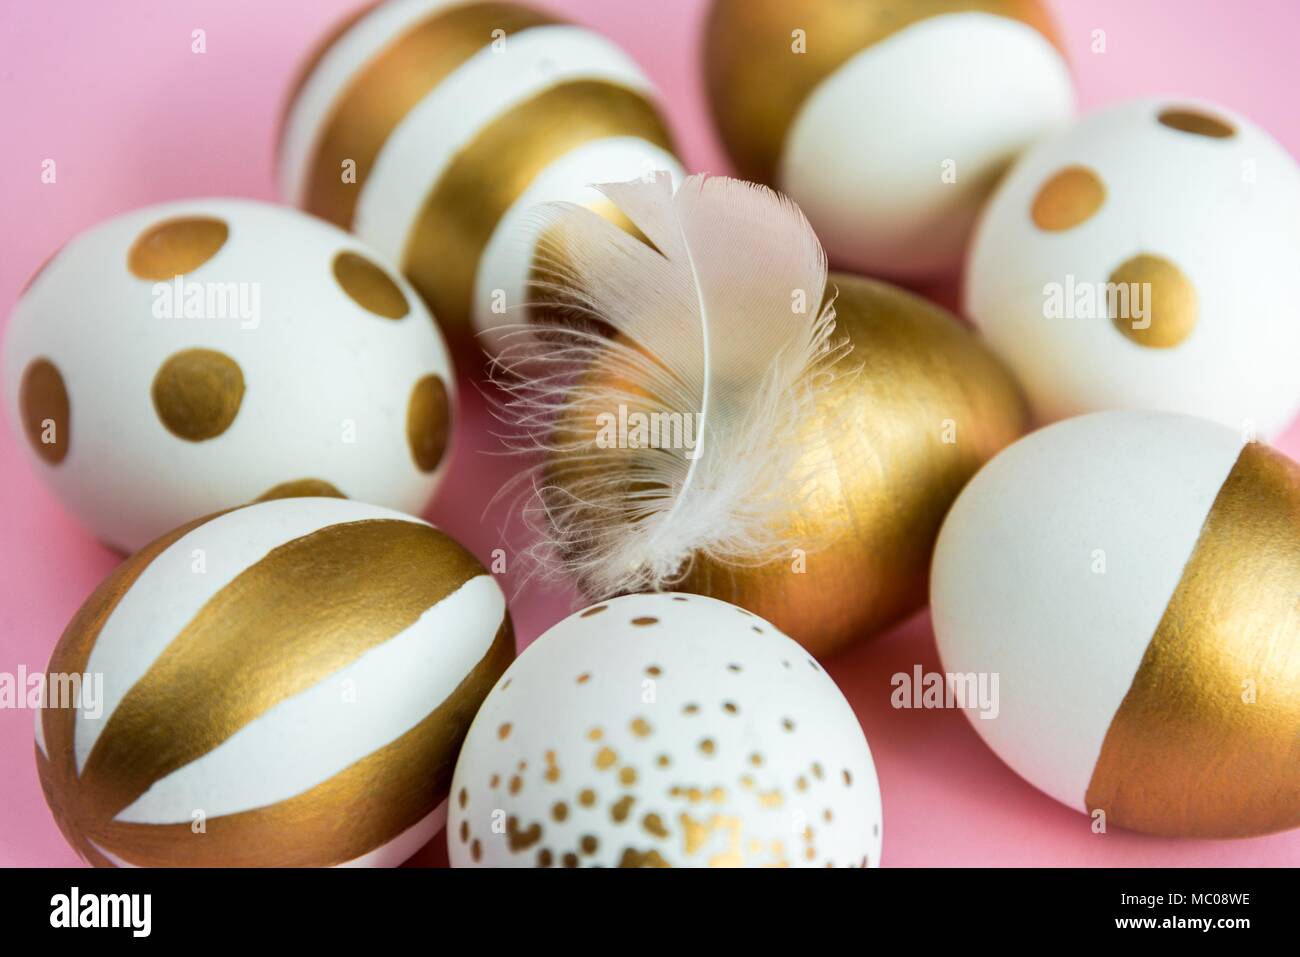 Close up of easter eggs colored with golden paint. Various striped and dotted designs. Pink background. Stock Photo